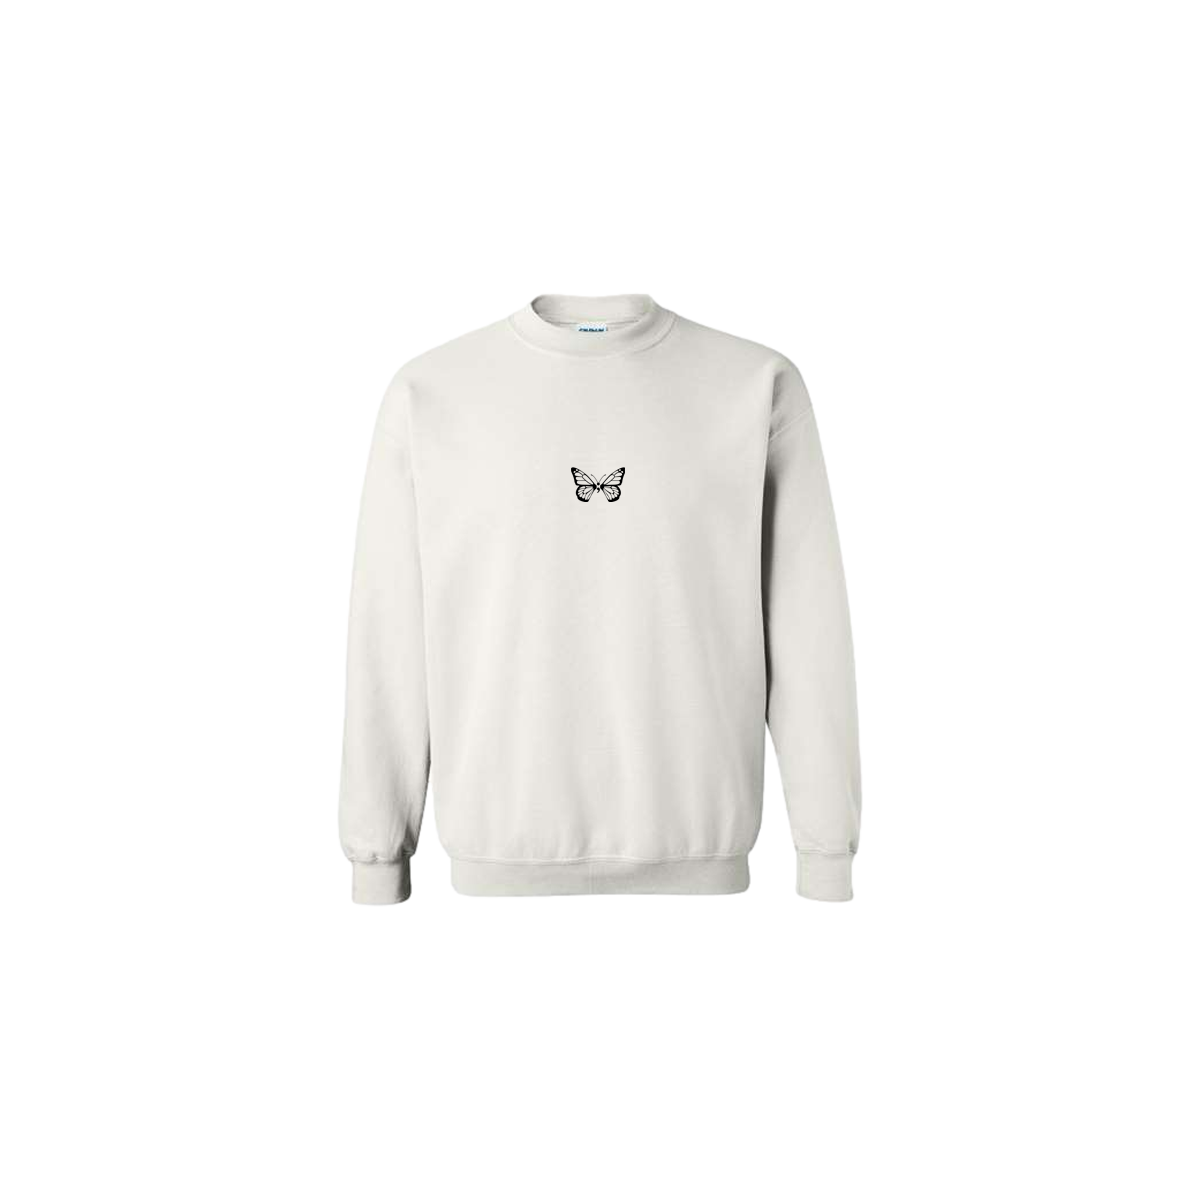 Butterfly Embroidered White Crewneck - Mental Health Awareness Clothing